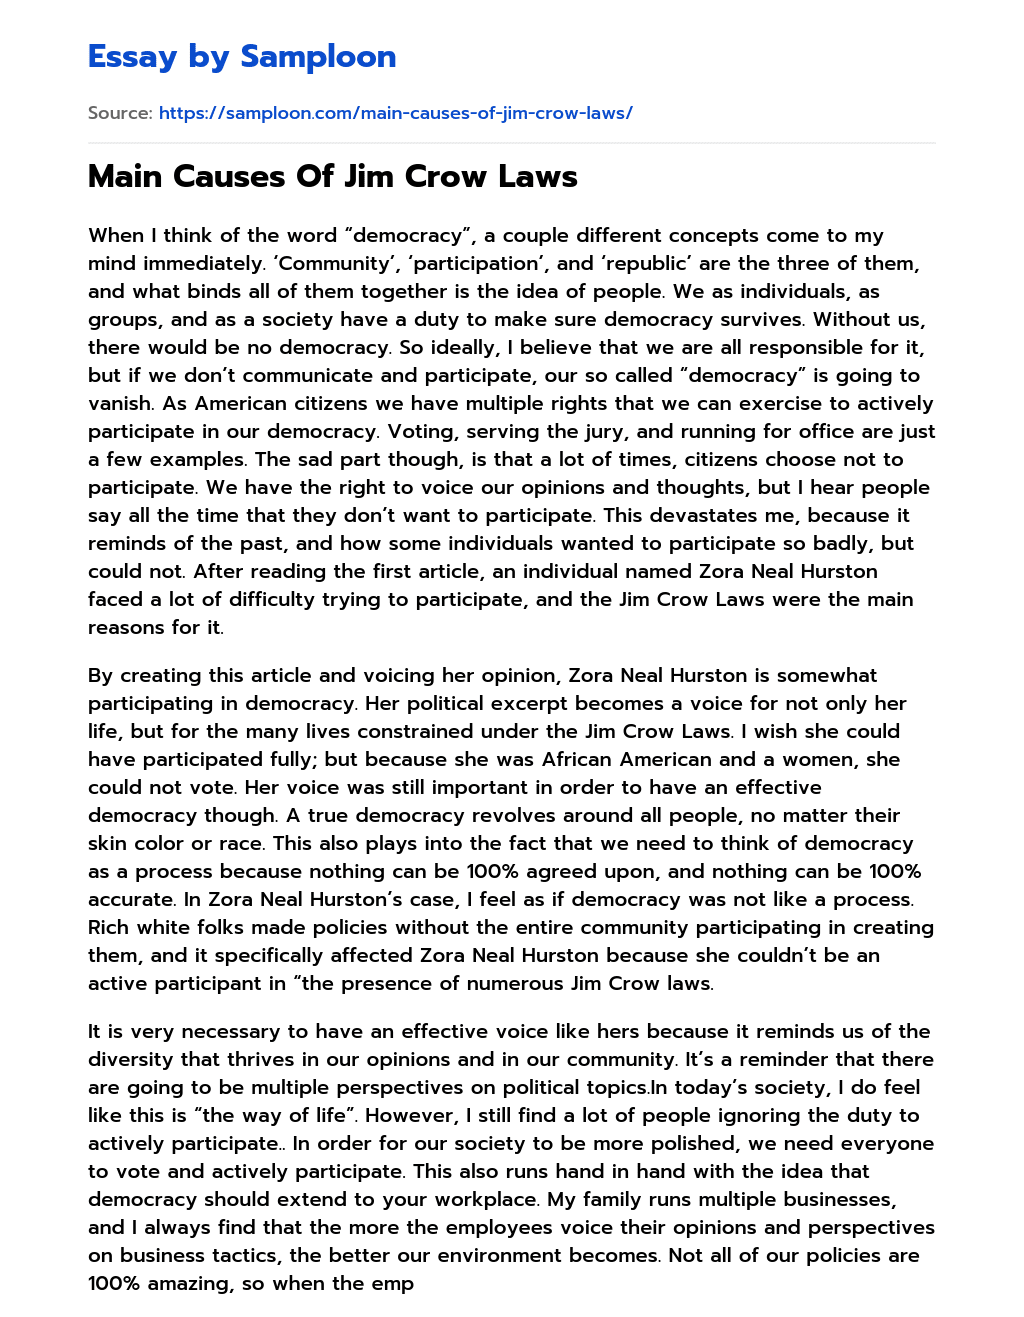 Main Causes Of Jim Crow Laws essay